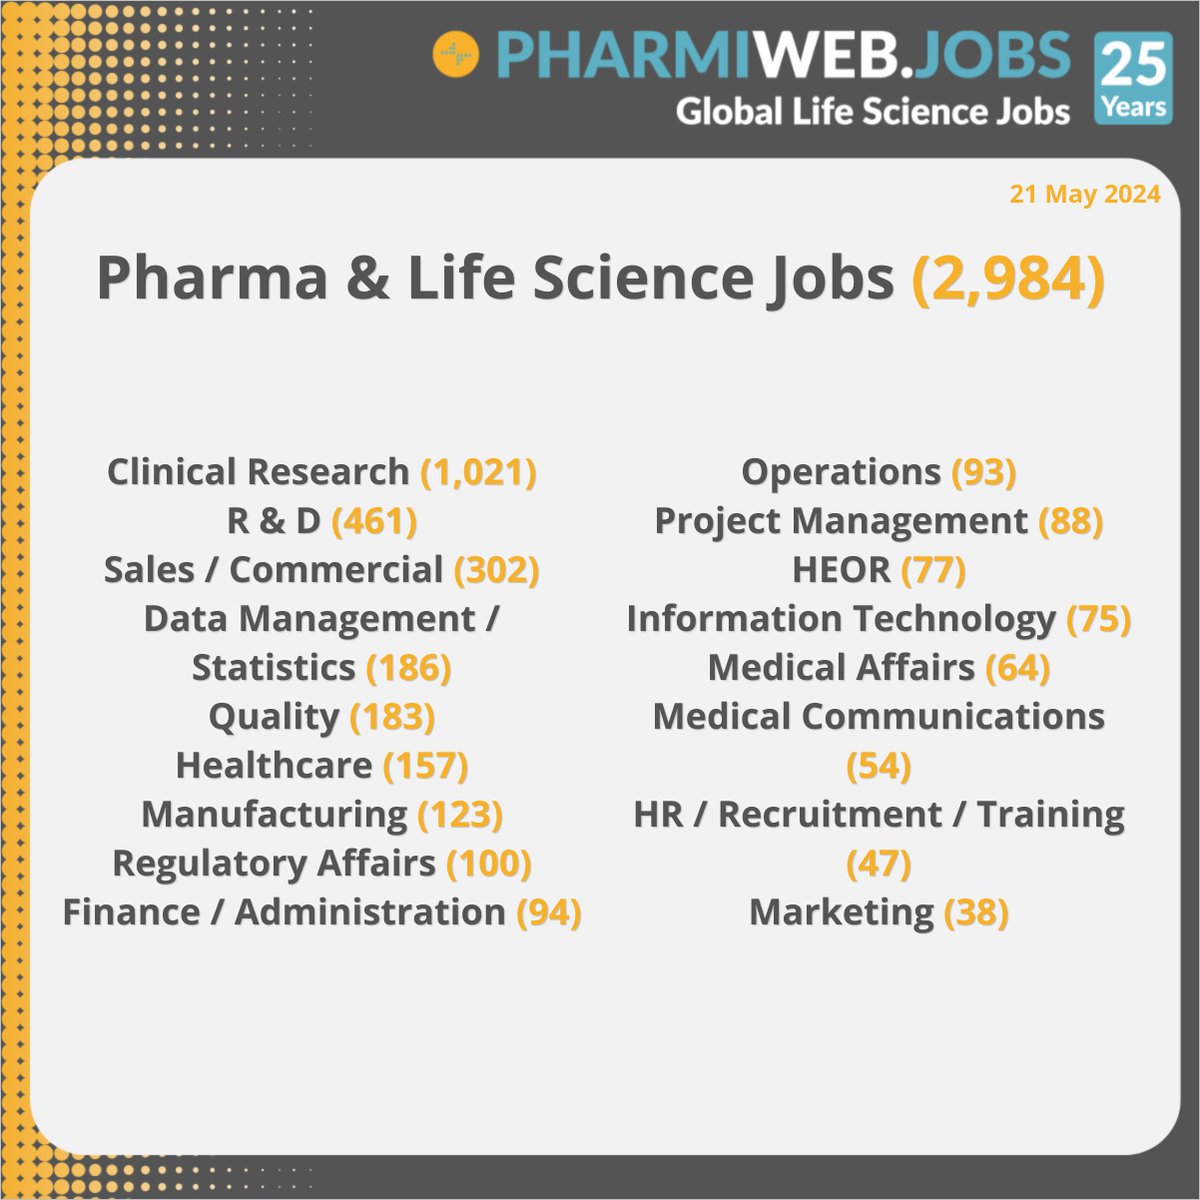 2,984 Pharma & Life Science Jobs Today
Search Now - buff.ly/3QVl4rT

Register & Upload Your CV Now! buff.ly/3QSXbRN

#Pharma #Biotech #ClinicalResearch #LifeSciences #MedicalDevices #Biotechnology #PharmaJobs #PharmiWeb